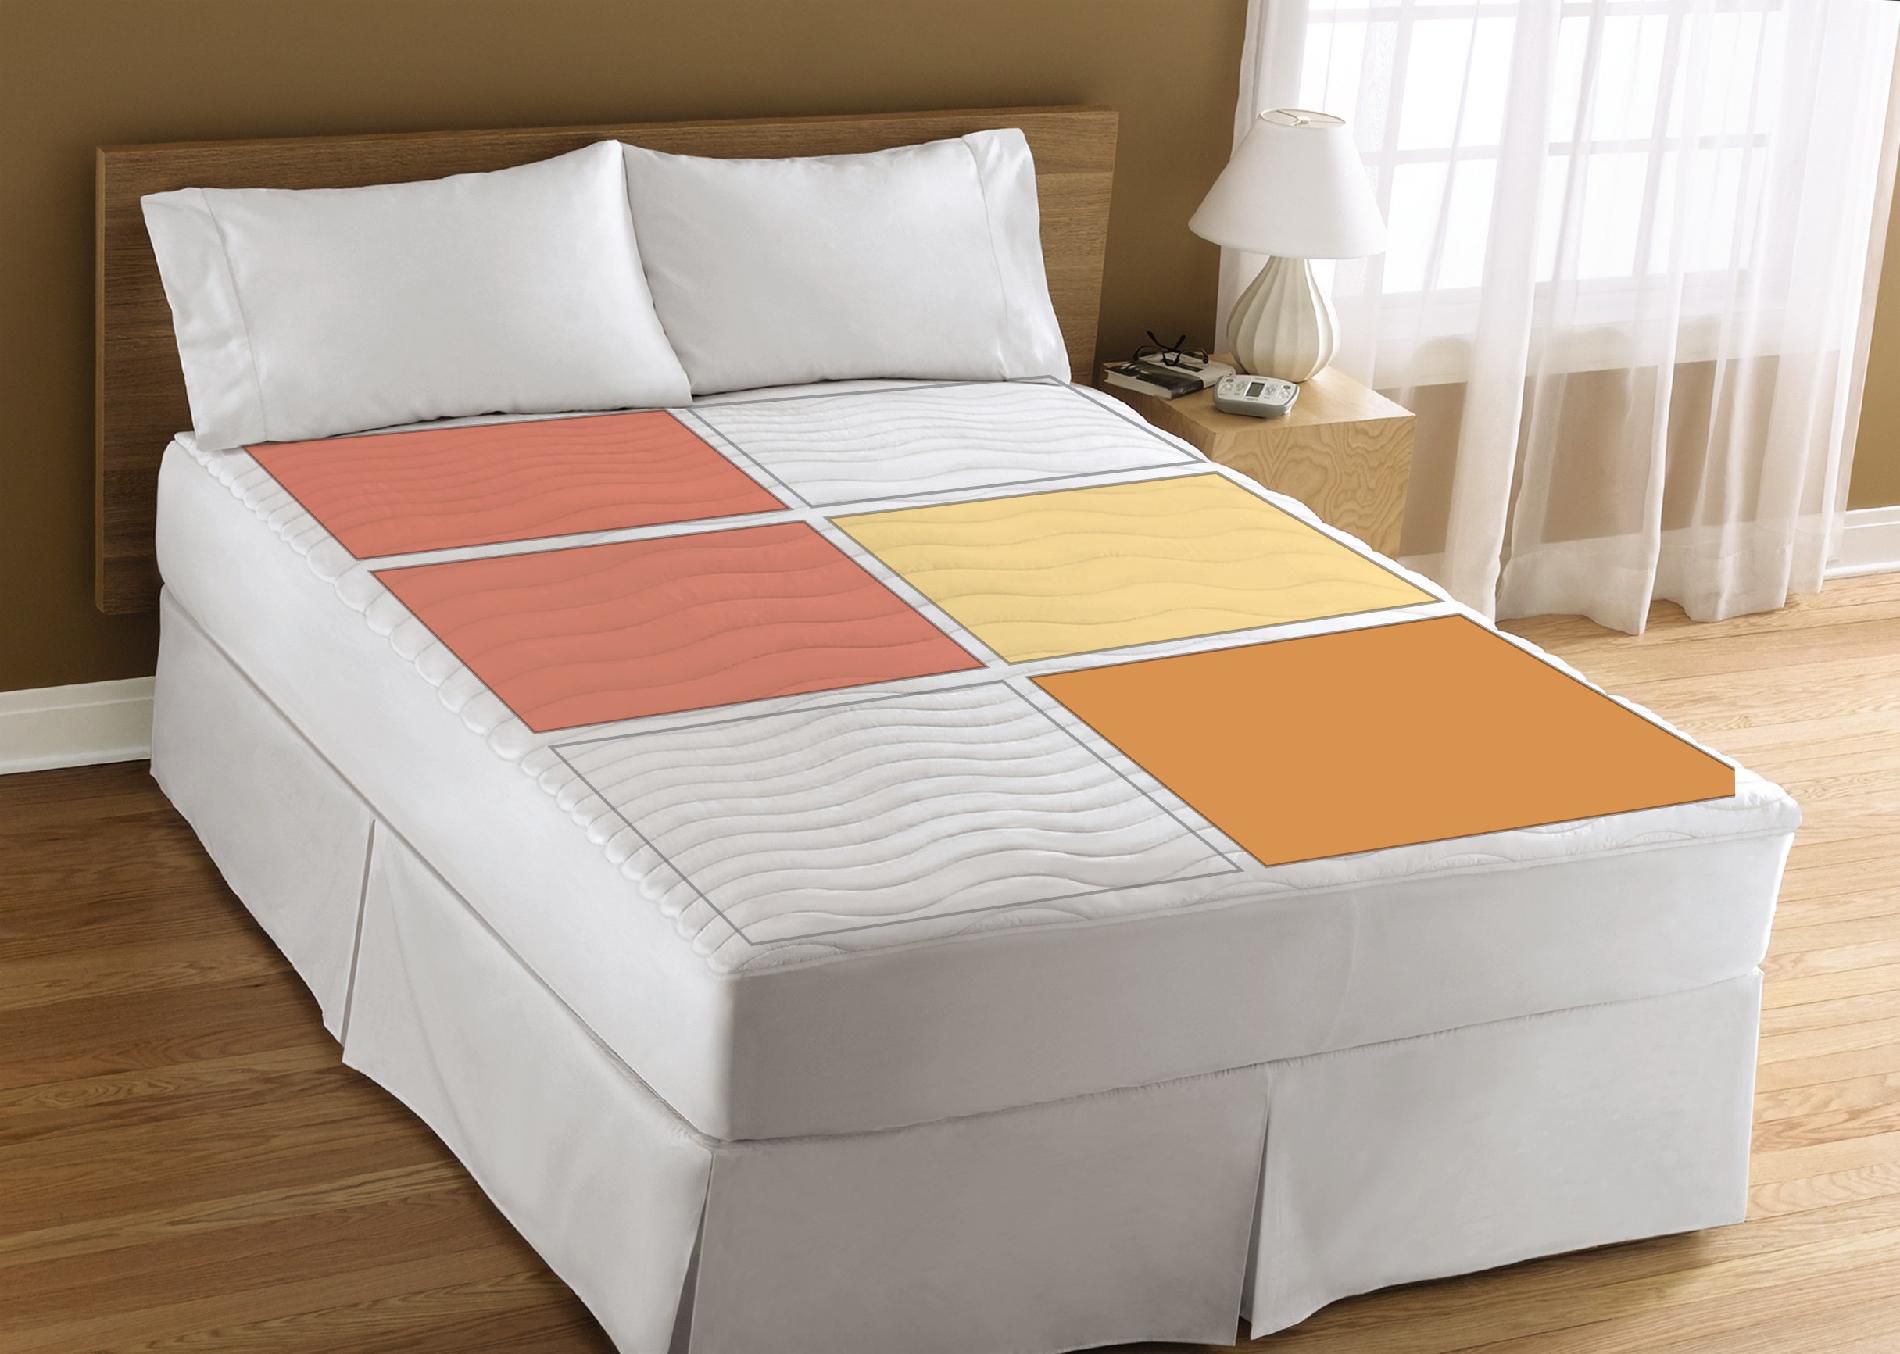 sunbeam rest and relieve therapeutic heated mattress pad